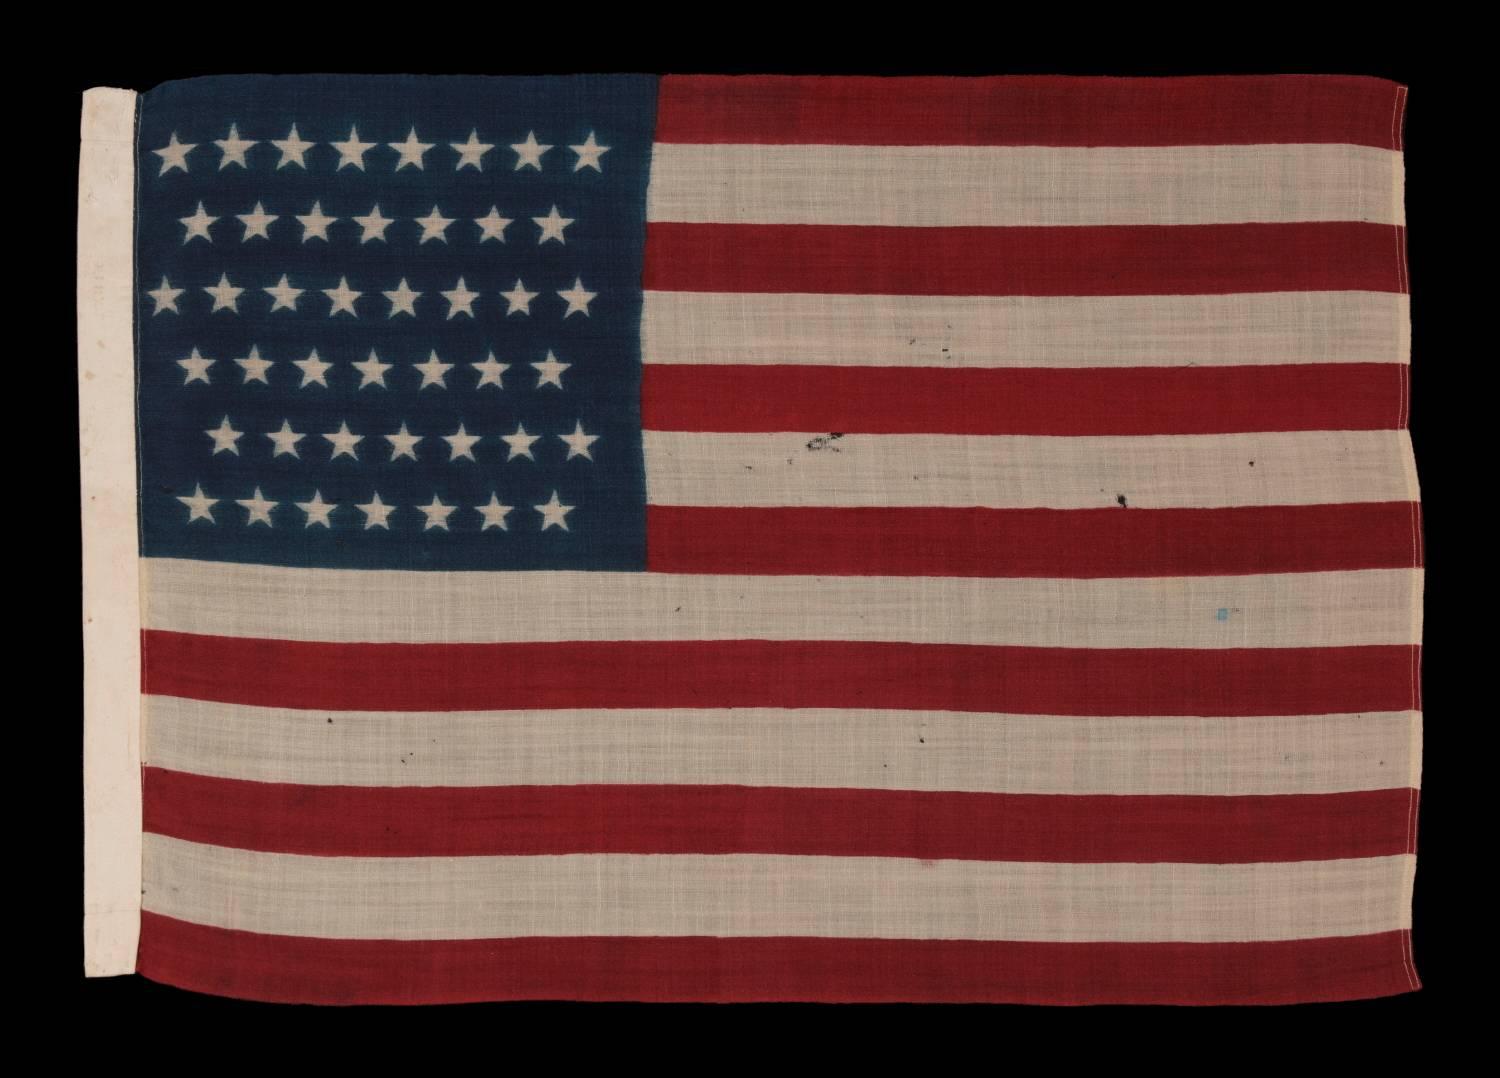 44 STARS IN ZIGZAGGING ROWS ON A PRESS-DYED WOOL AMERICAN FLAG, PROBABLY MADE BY THE HORSTMANN COMPANY IN PHILADELPHIA, POSSIBLY FOR USE AS A MILITARY CAMP COLORS, 1890-1896, REFLECTS WYOMING STATEHOOD:

44 star American national flag, press-dyed on